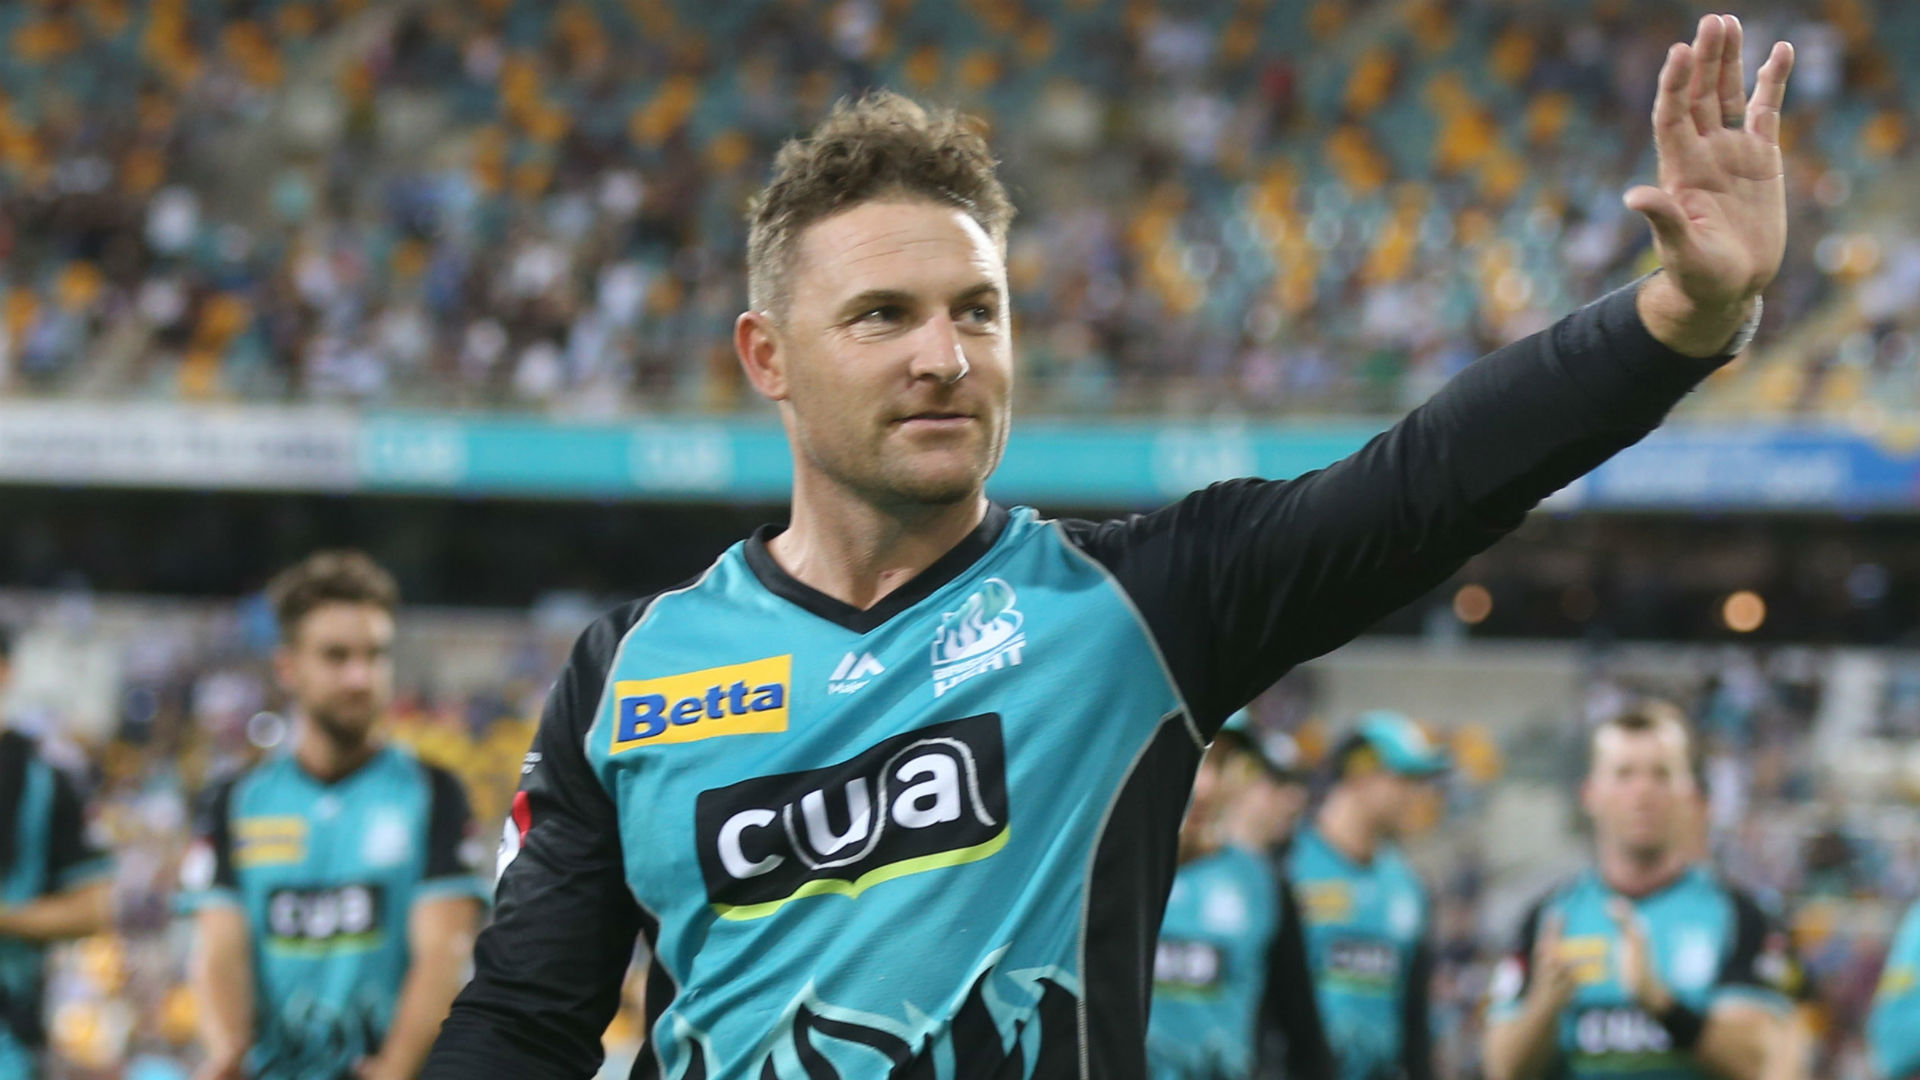 Former NZ captain Brendon McCullum retires from all forms of cricket